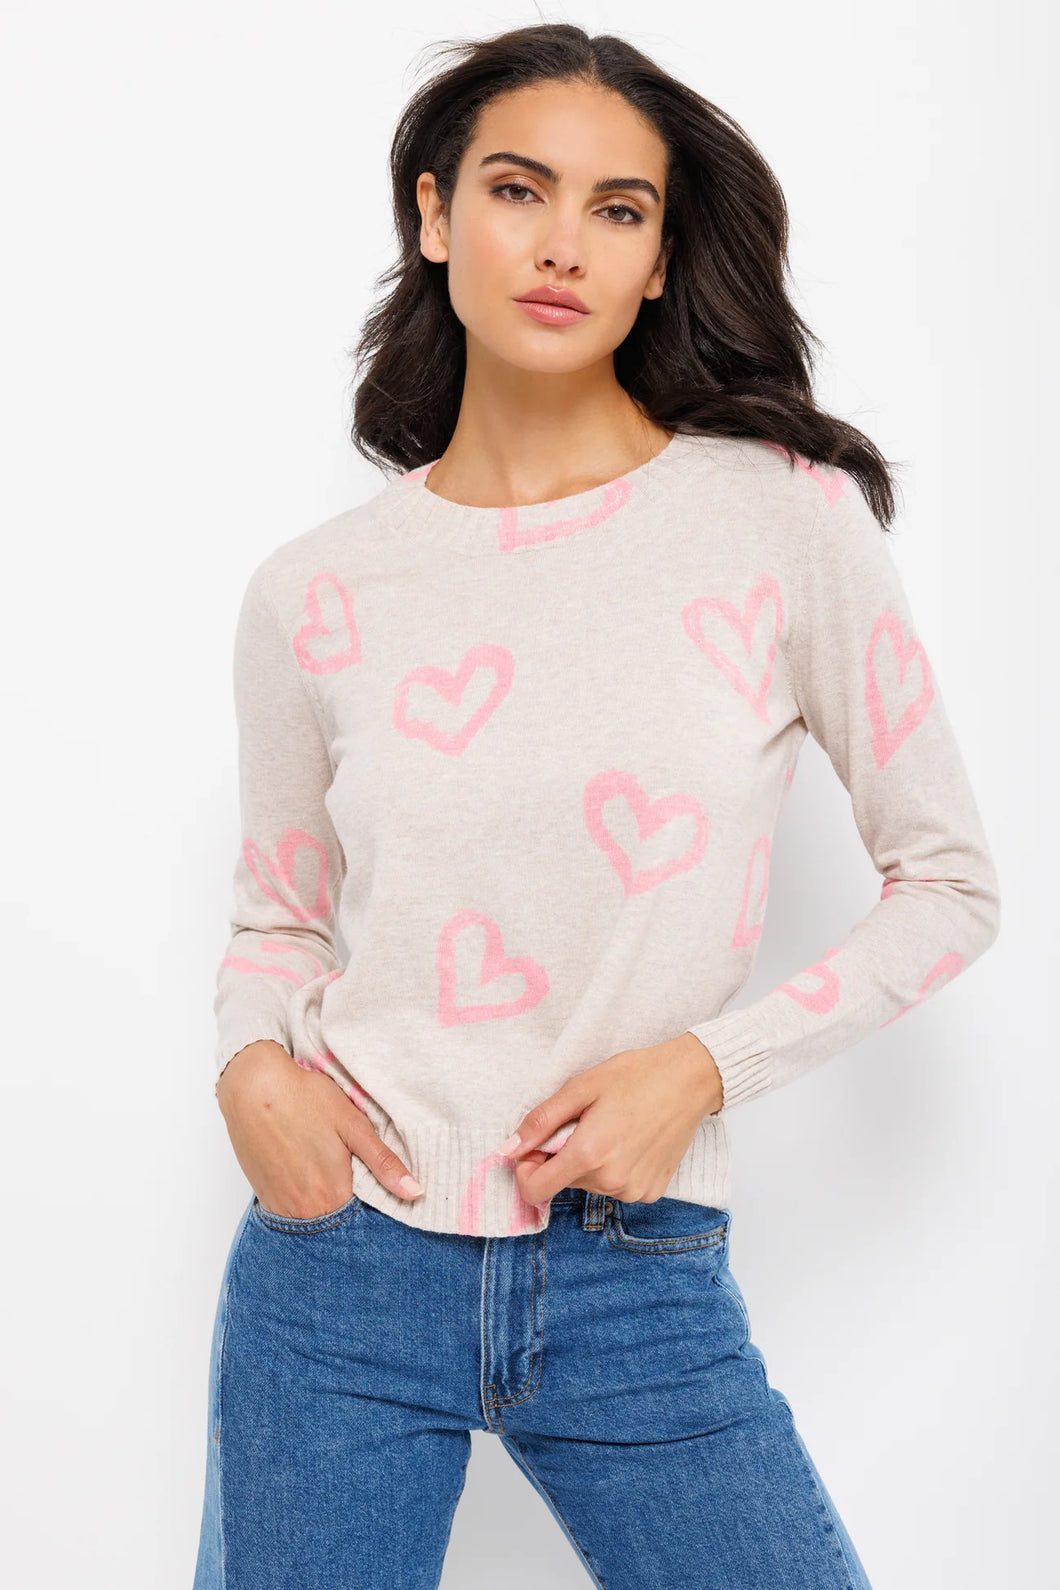 Love Zone Sweater By Lisa Todd!  *New Arrivals*